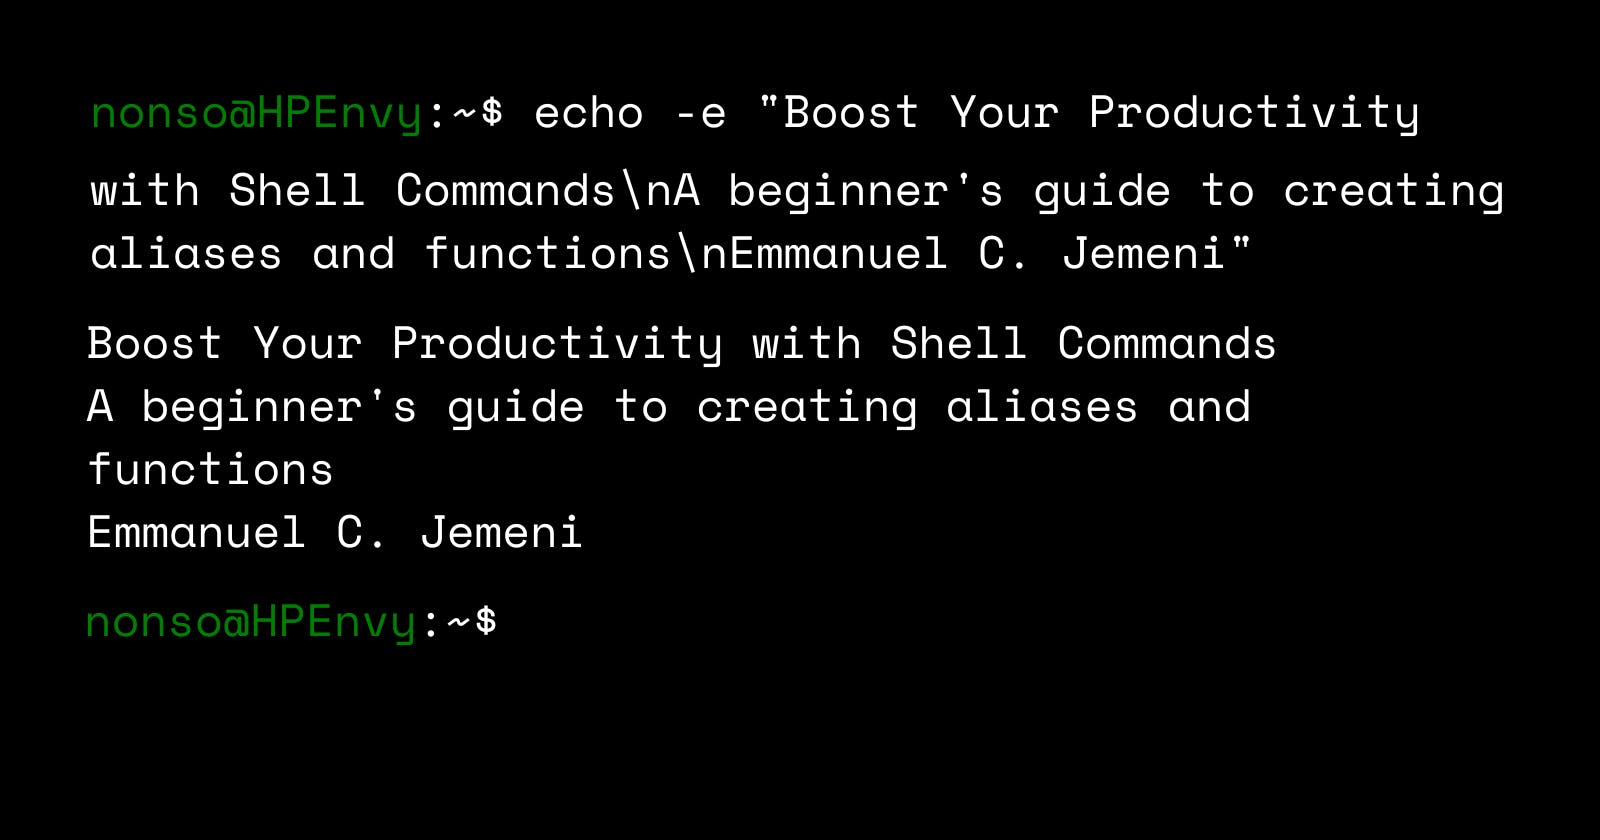 Boost Your Productivity with Shell Commands